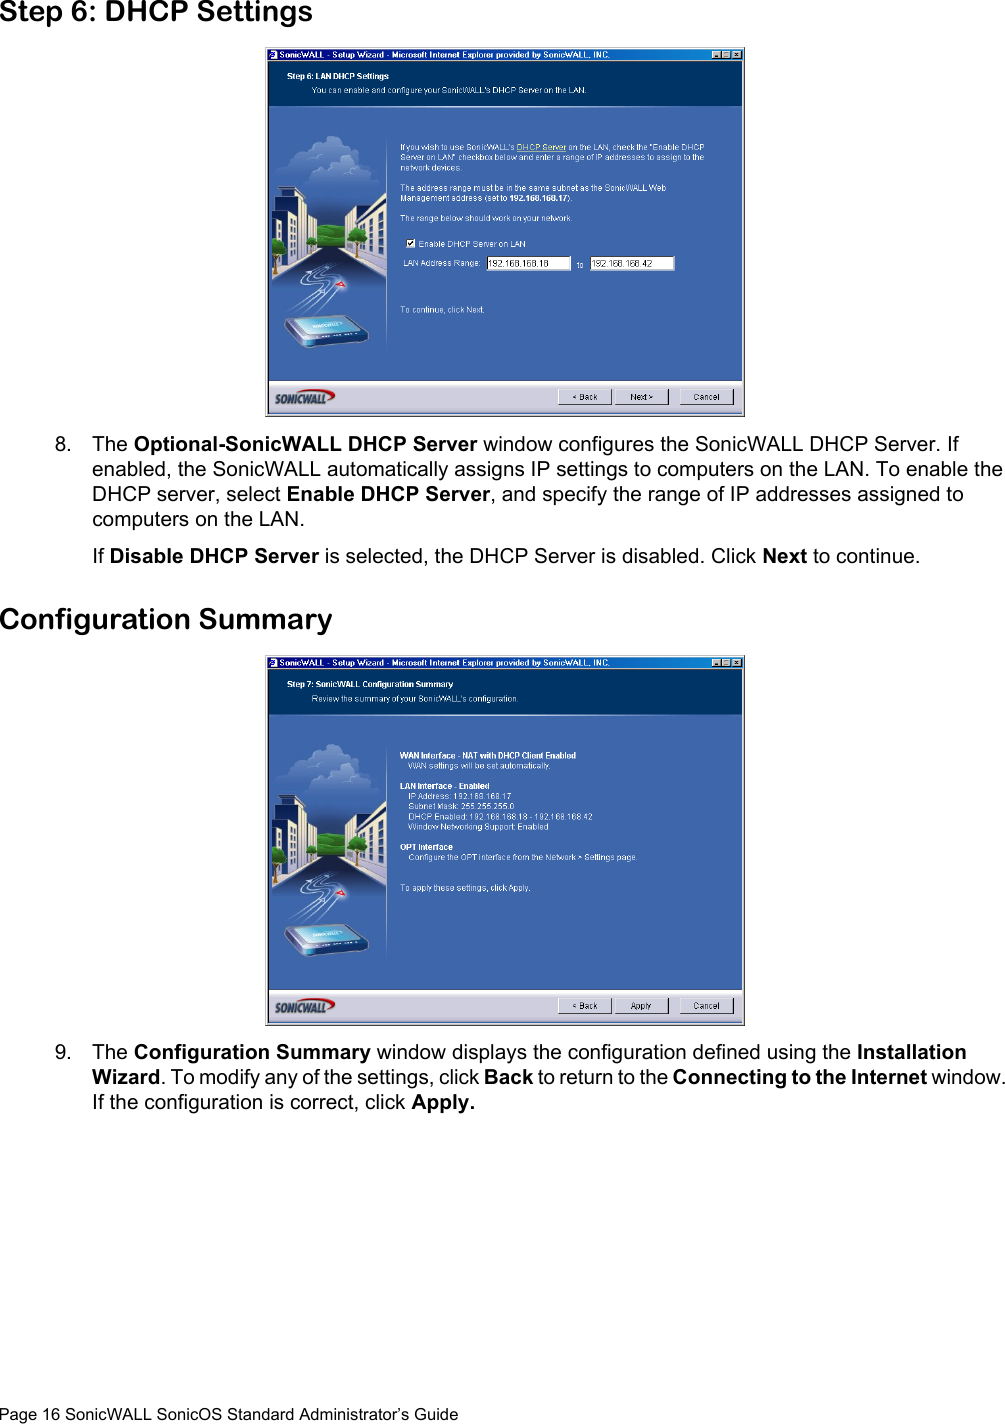 Page 16 SonicWALL SonicOS Standard Administrator’s GuideStep 6: DHCP Settings8. The Optional-SonicWALL DHCP Server window configures the SonicWALL DHCP Server. If enabled, the SonicWALL automatically assigns IP settings to computers on the LAN. To enable the DHCP server, select Enable DHCP Server, and specify the range of IP addresses assigned to computers on the LAN. If Disable DHCP Server is selected, the DHCP Server is disabled. Click Next to continue. Configuration Summary9. The Configuration Summary window displays the configuration defined using the Installation Wizard. To modify any of the settings, click Back to return to the Connecting to the Internet window. If the configuration is correct, click Apply. 